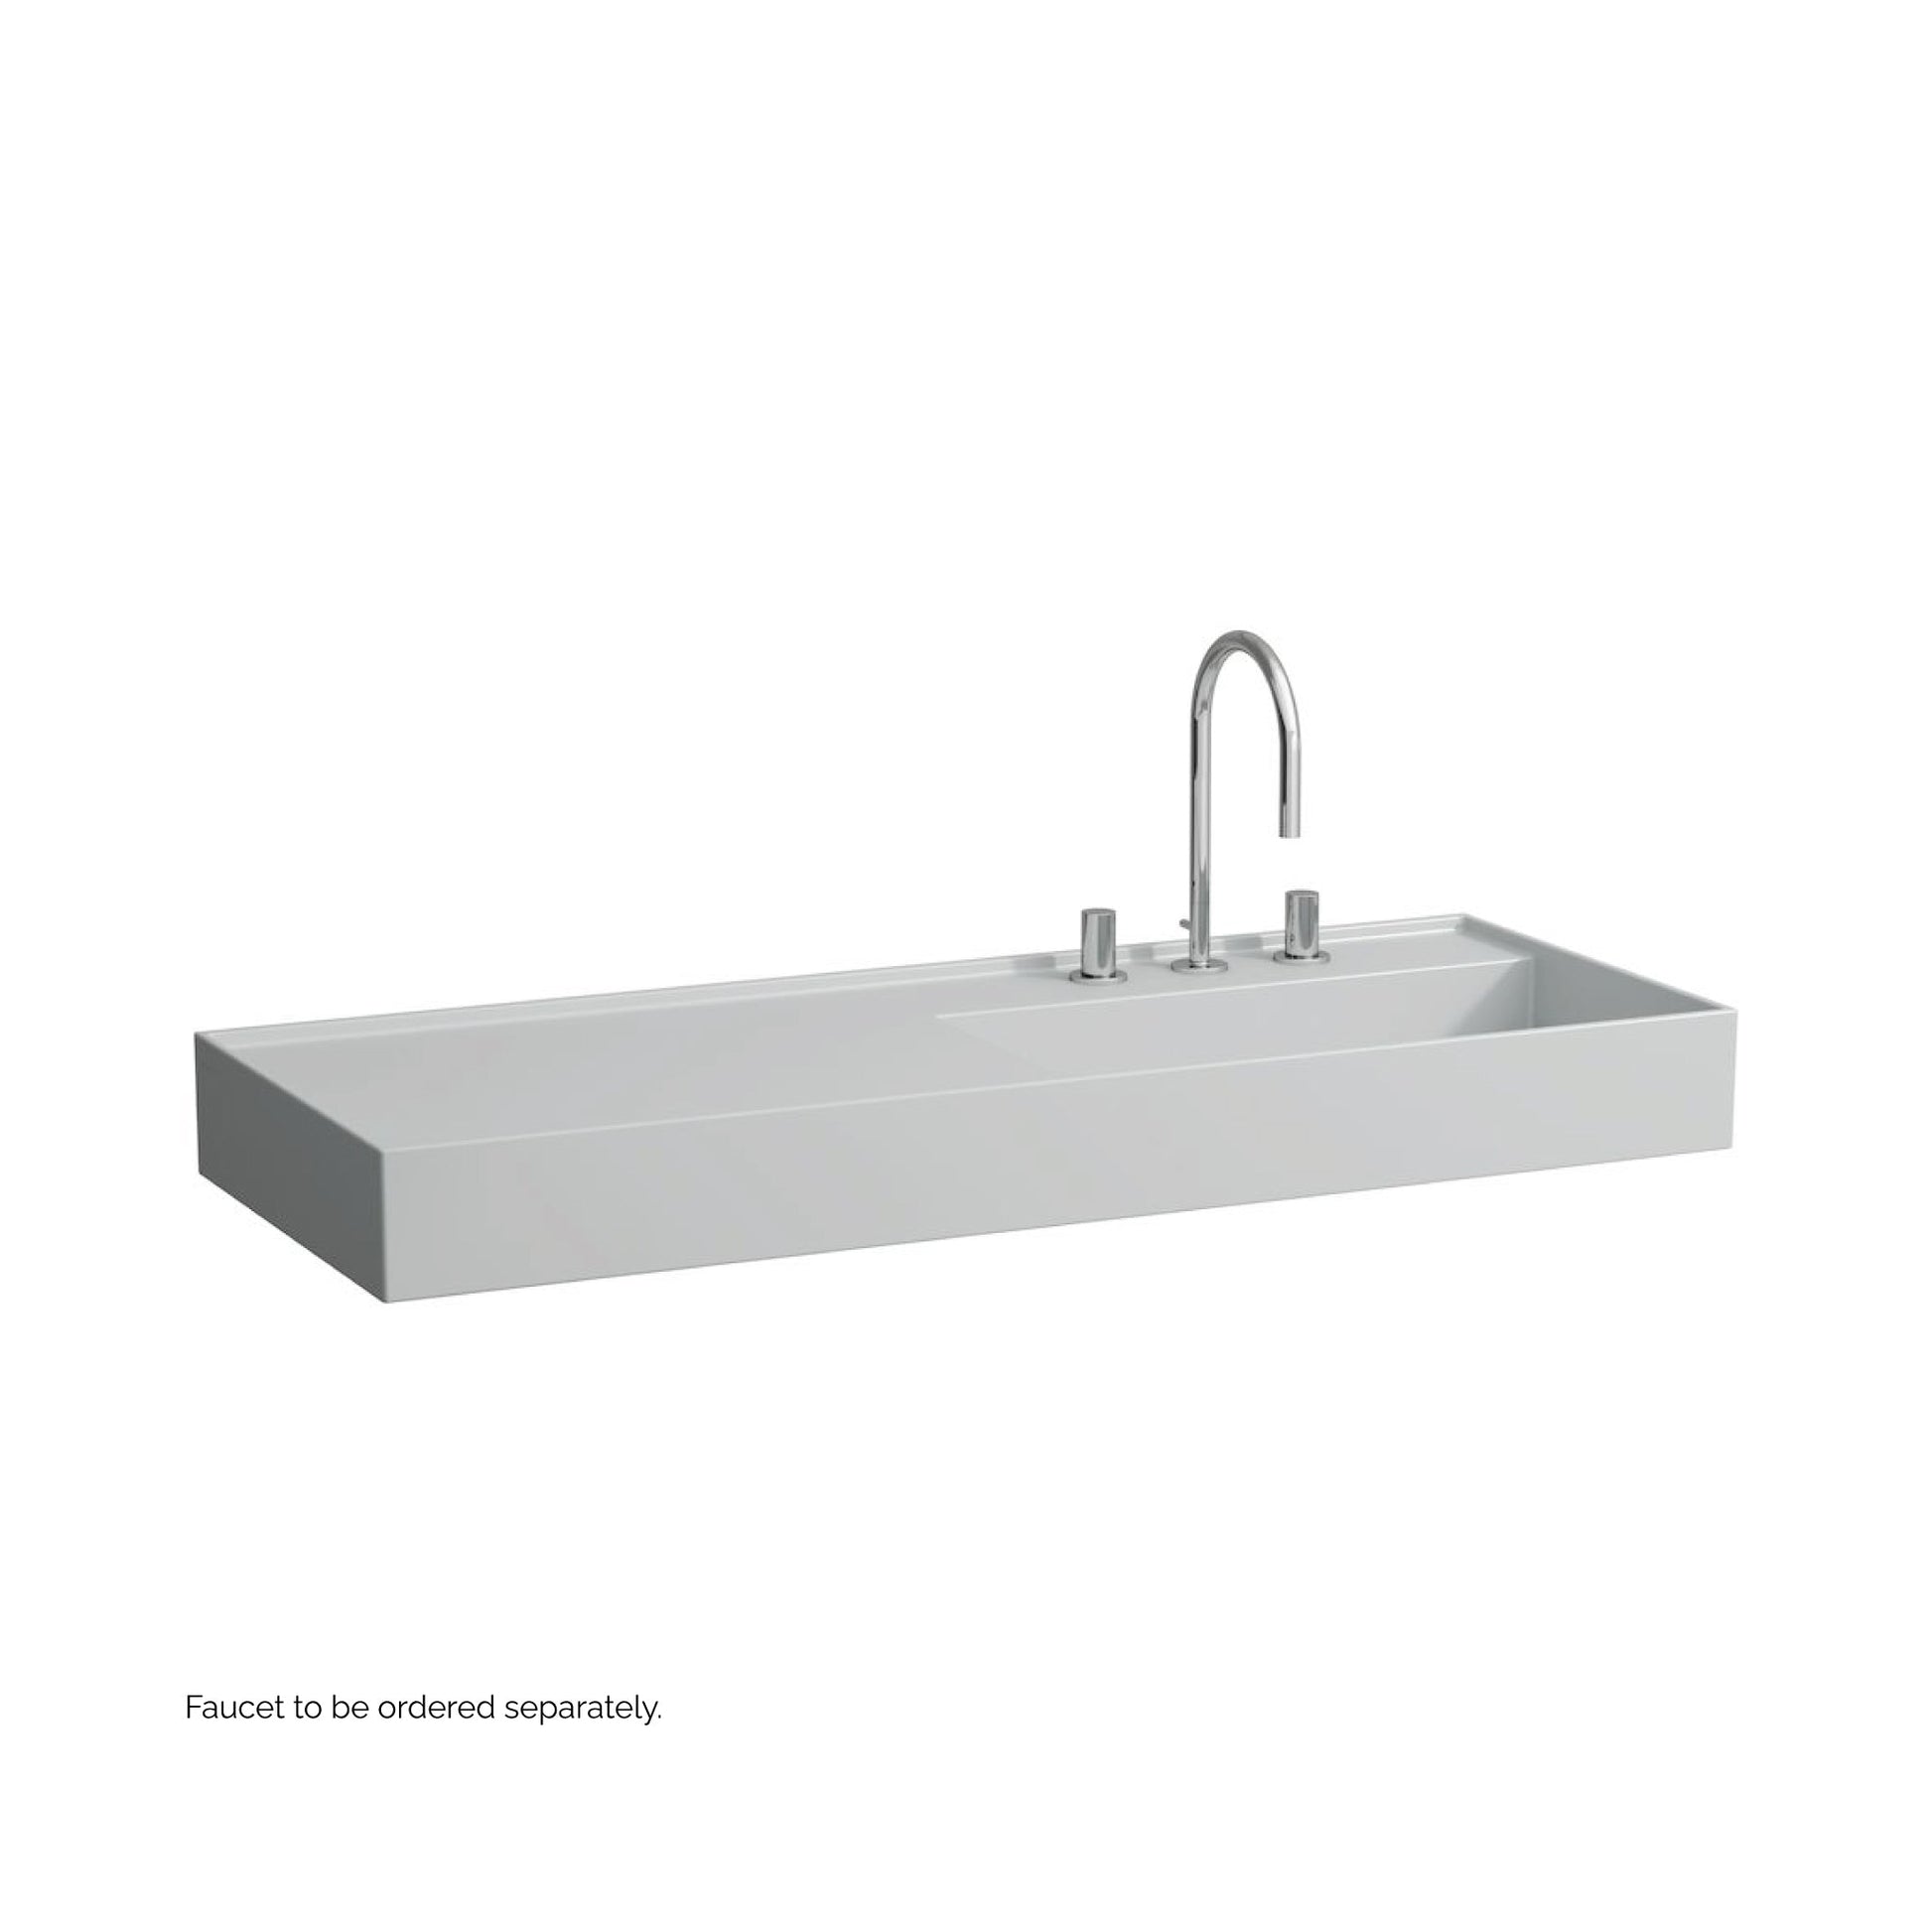 Laufen Kartell 47" x 18" Matte Gray Wall-Mounted Shelf-Left Bathroom Sink With 3 Faucet Holes